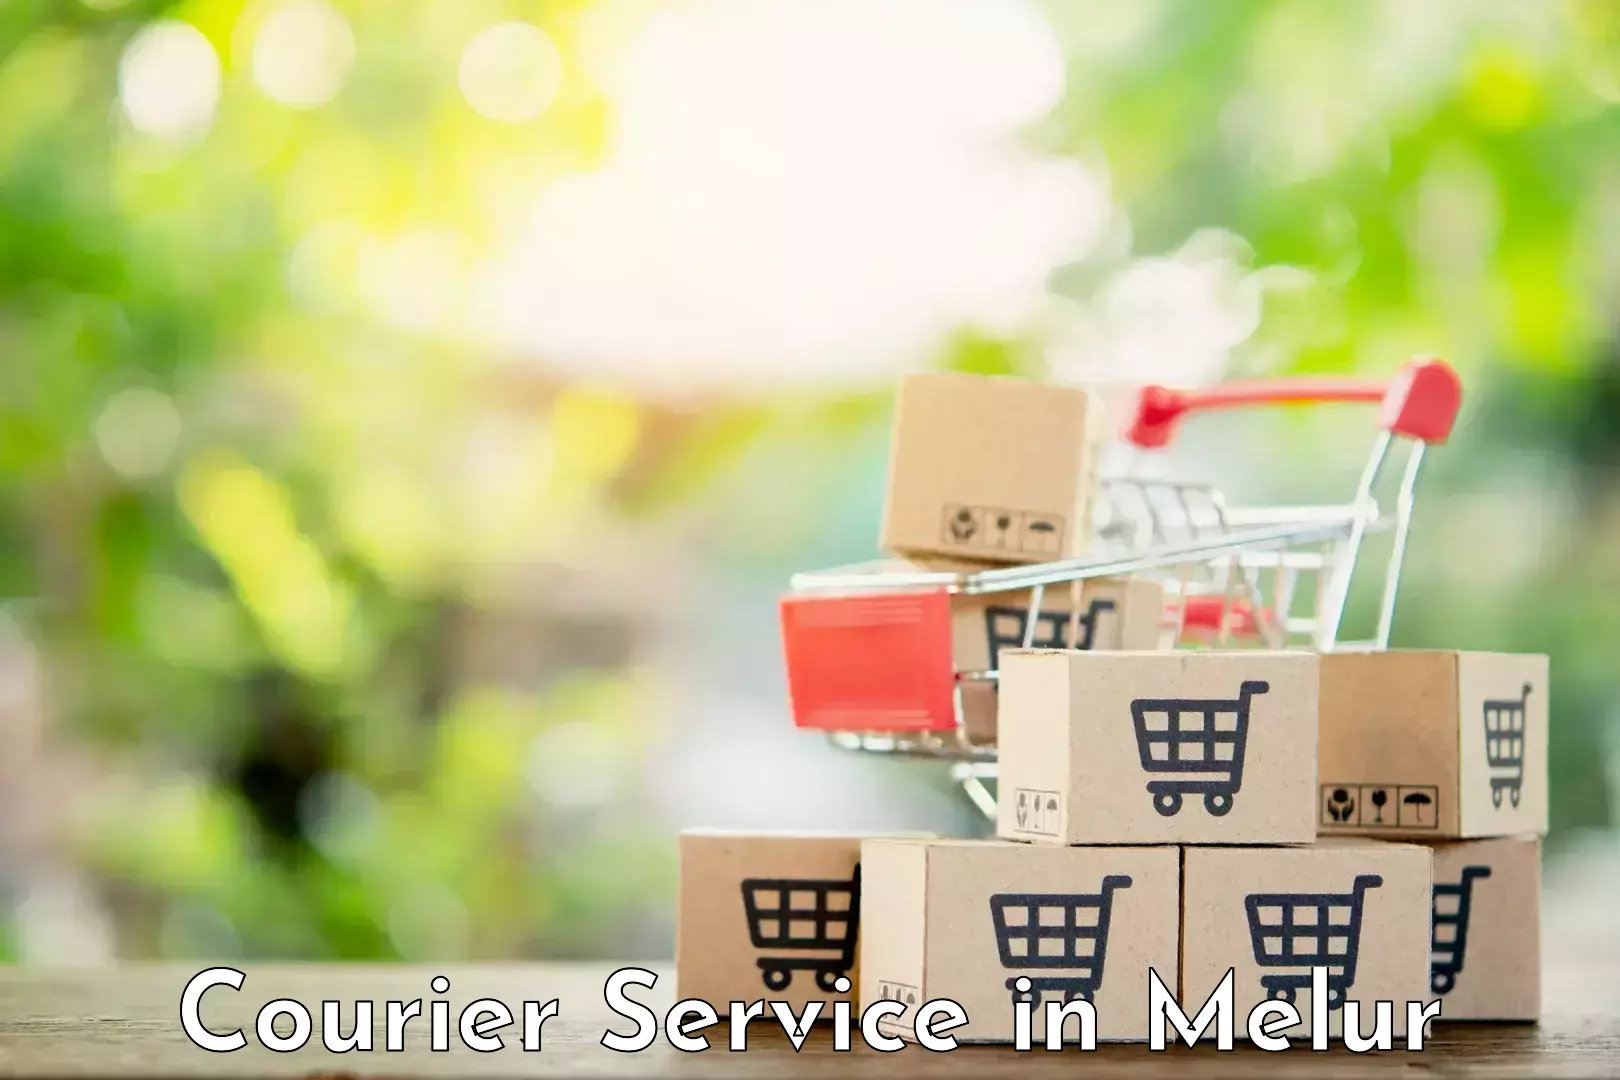 Courier service partnerships in Melur